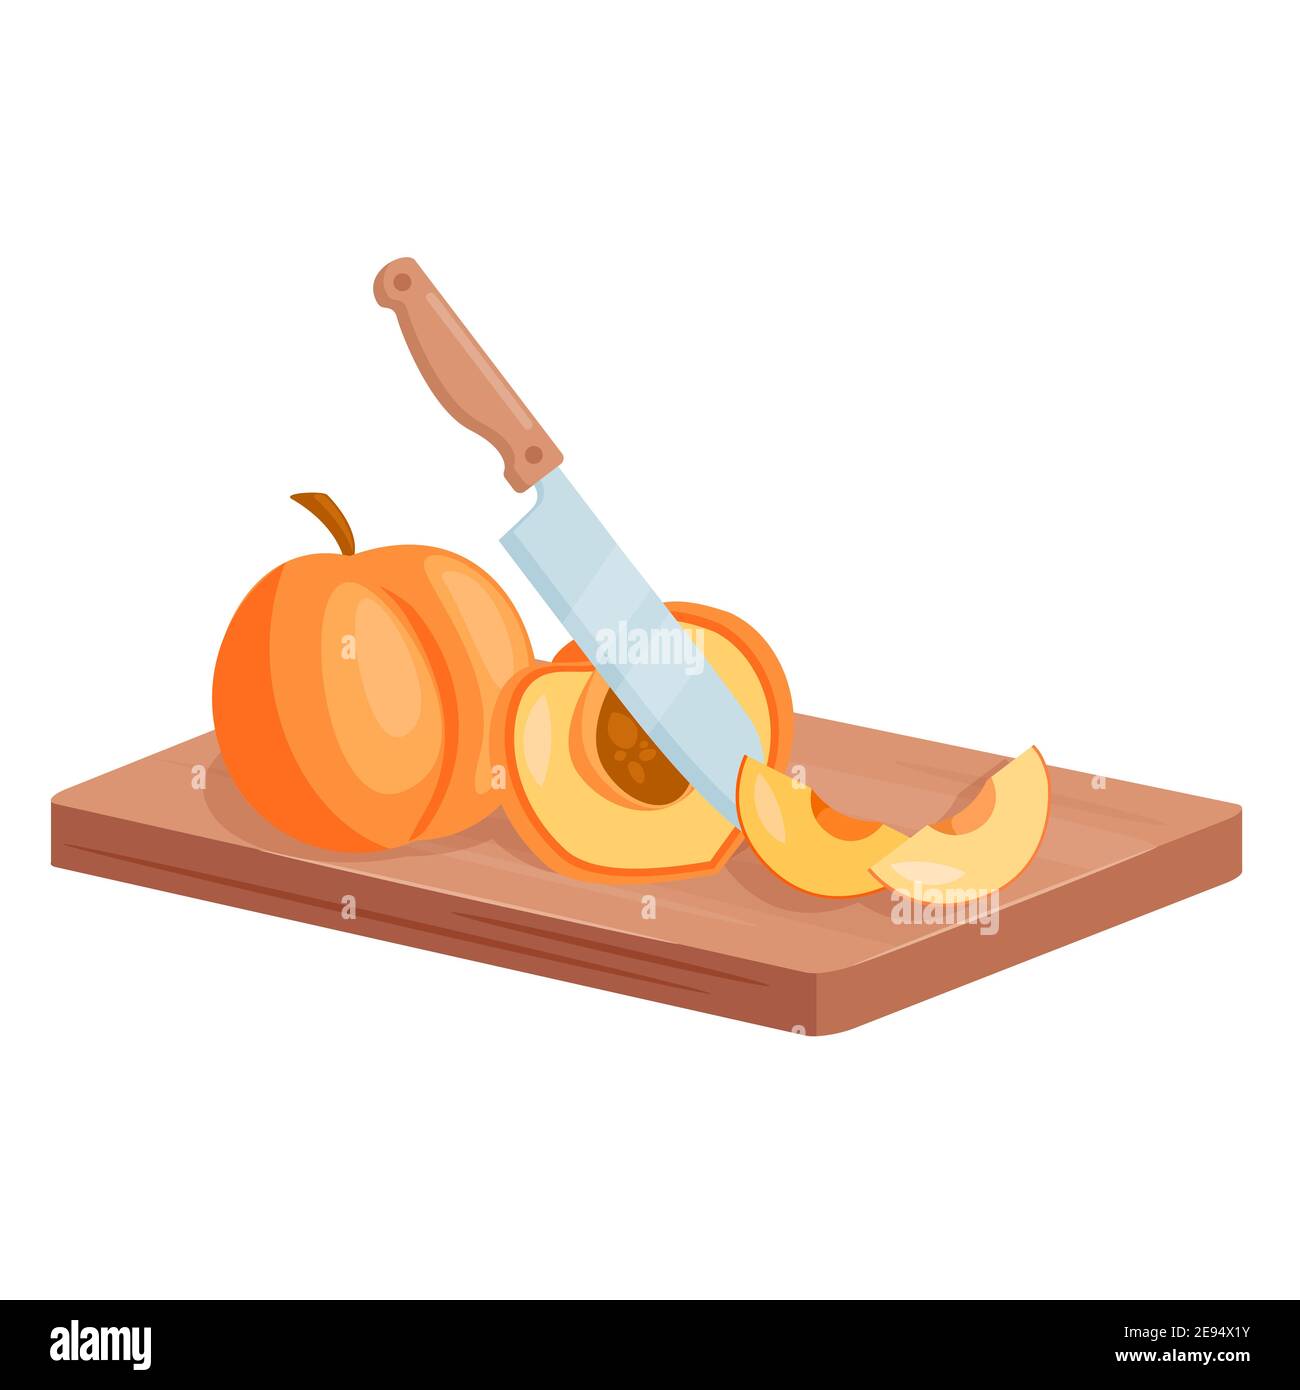 Cut peach fruits, isometric ripe juicy peach chopped slices lie on cutting board plank Stock Vector